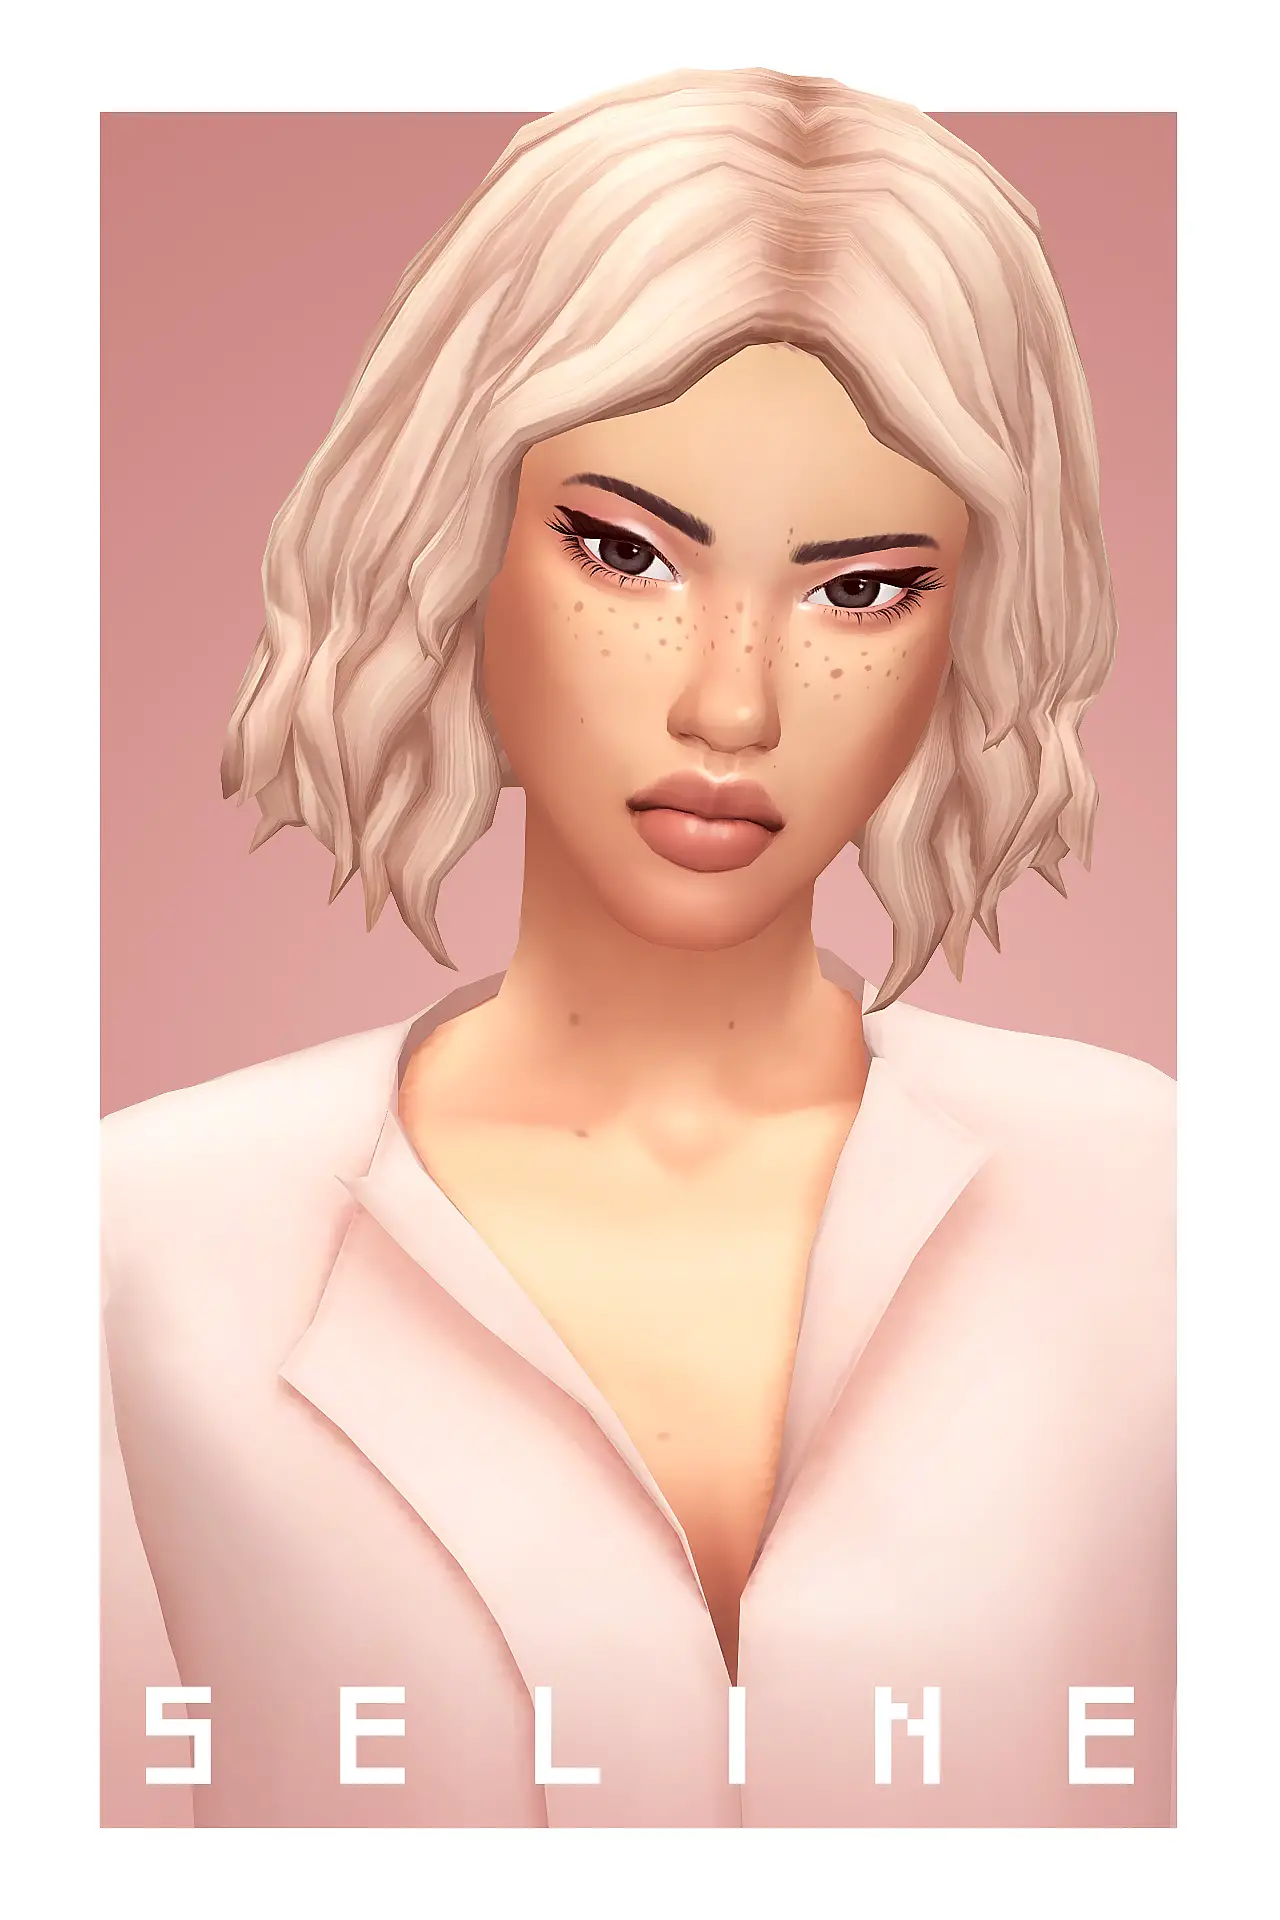 make add on swatches to cc hair sims 4 tumblr